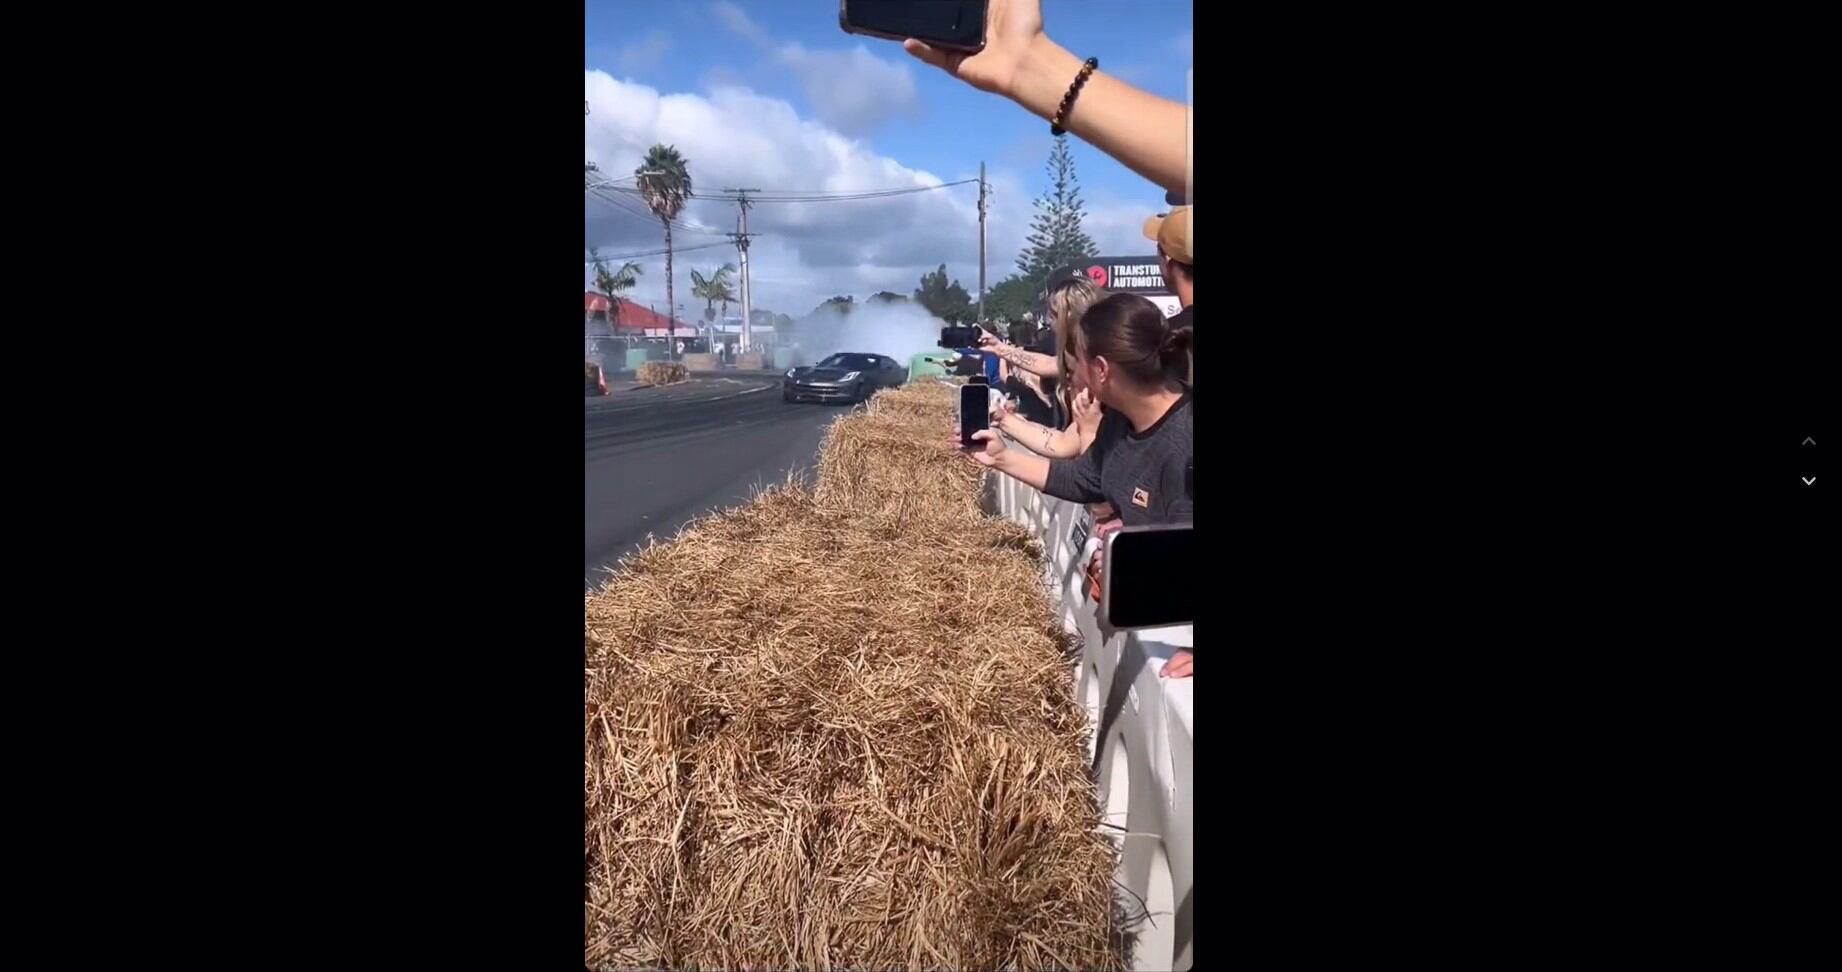 Northland Street Sprint race car crashes into safety barrier and crowd ...